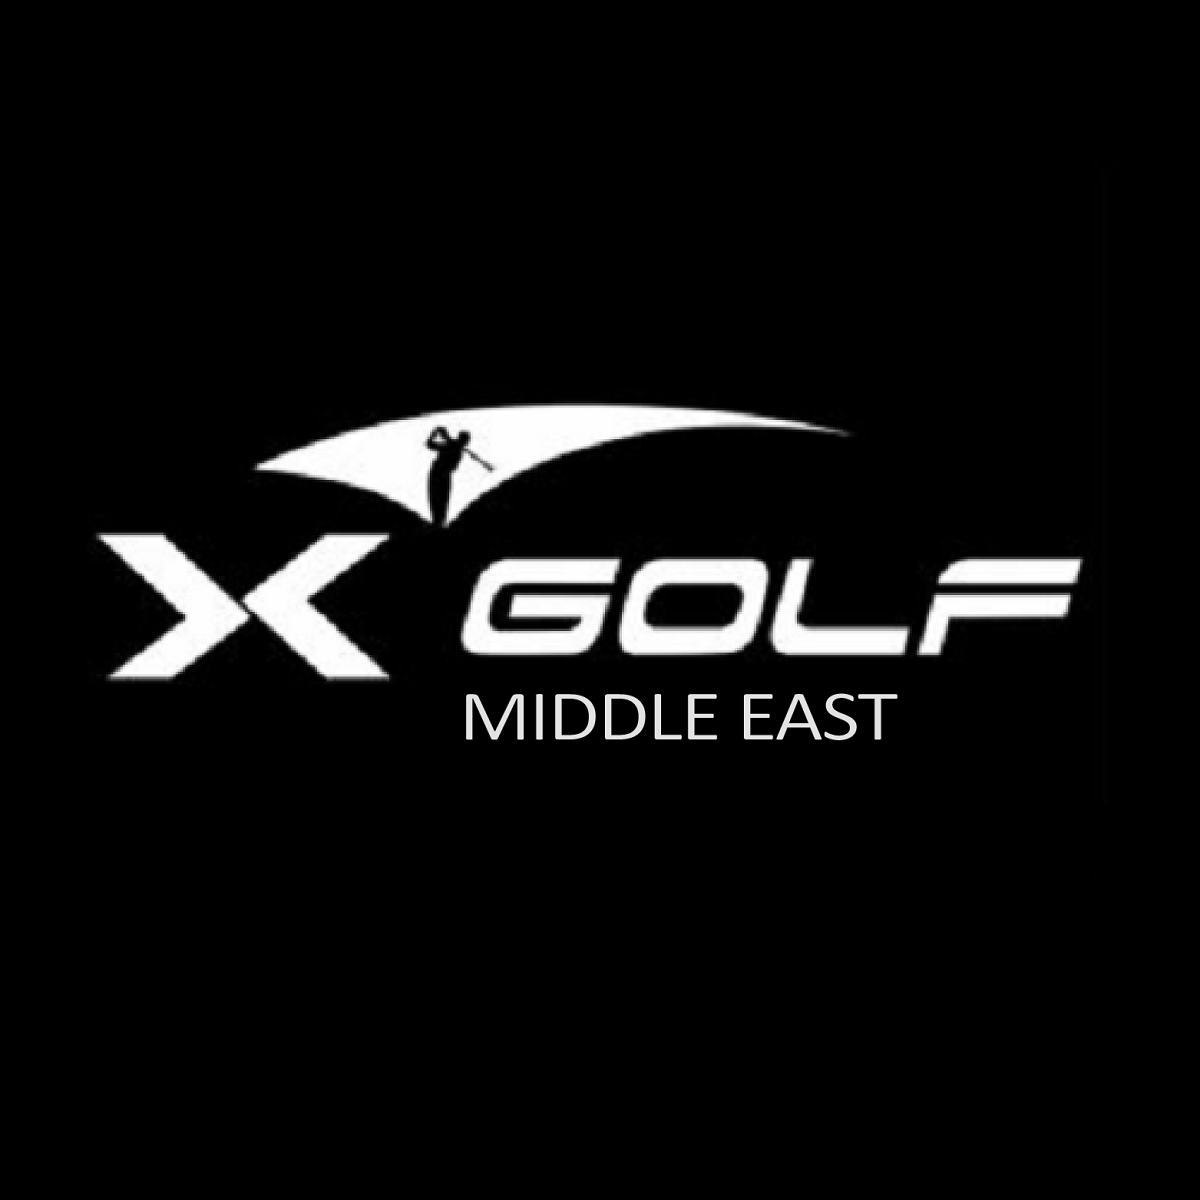 Logo of X-Golf Middle East